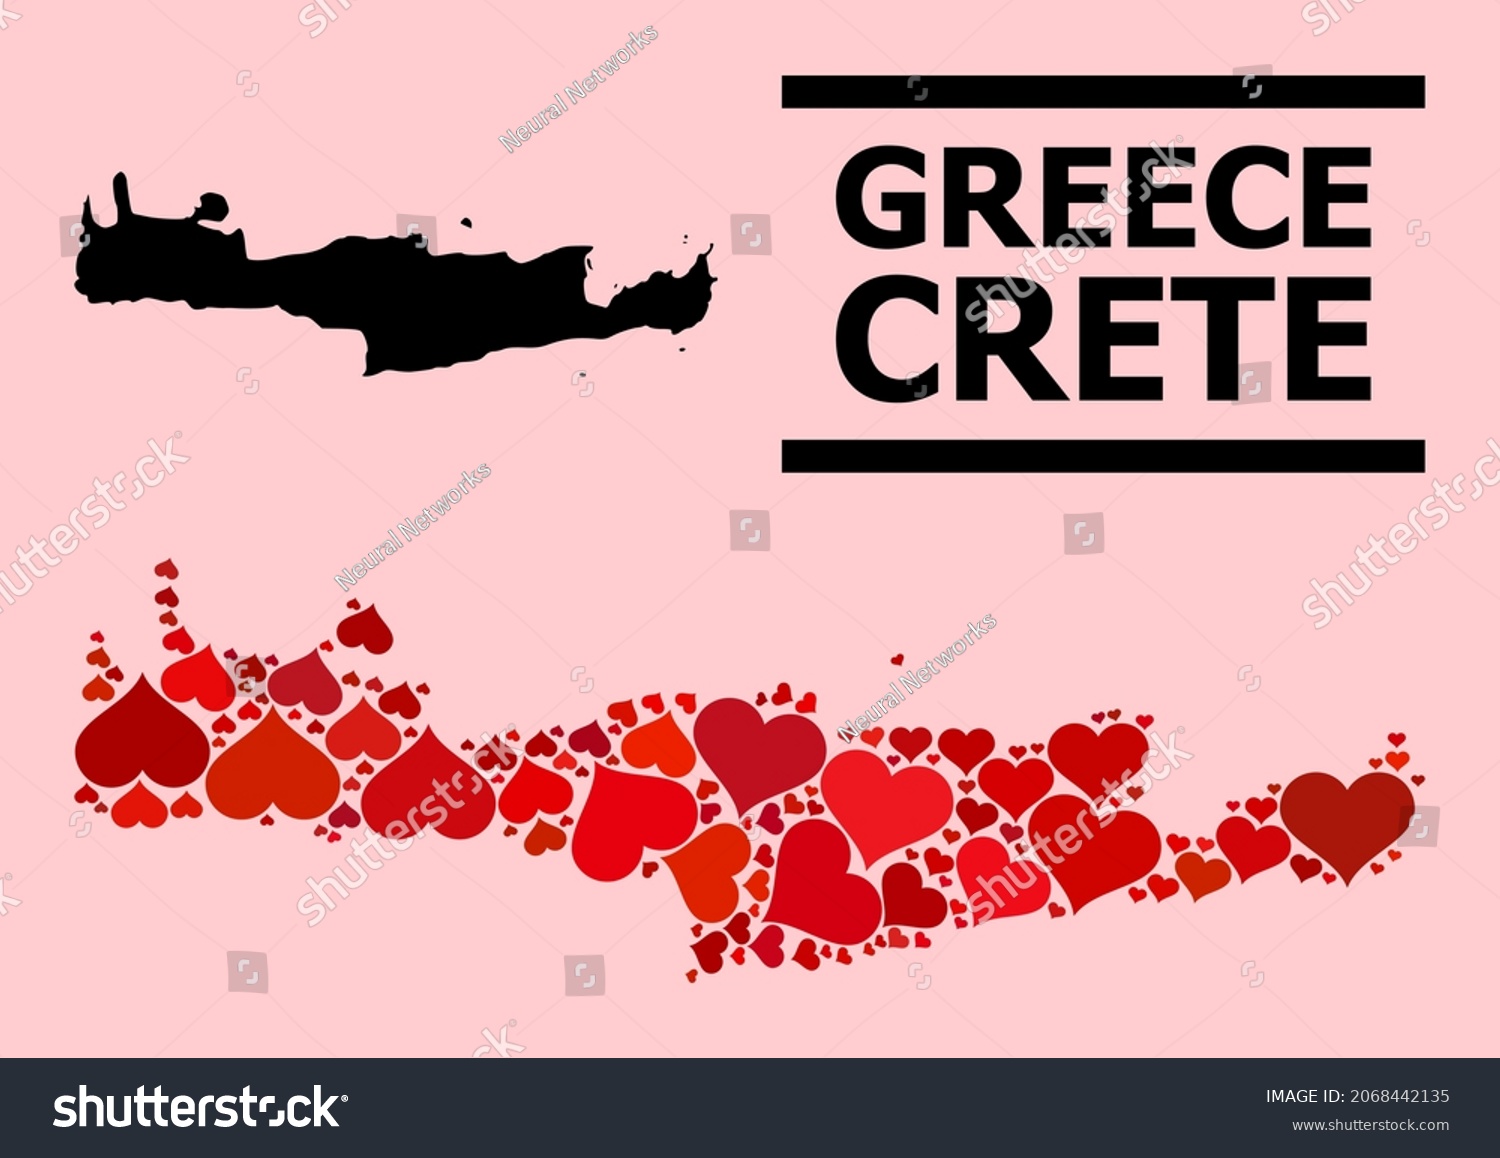 SVG of Love pattern and solid map of Crete Island on a pink background. Collage map of Crete Island designed with red love hearts. Vector flat illustration for love conceptual illustrations. svg